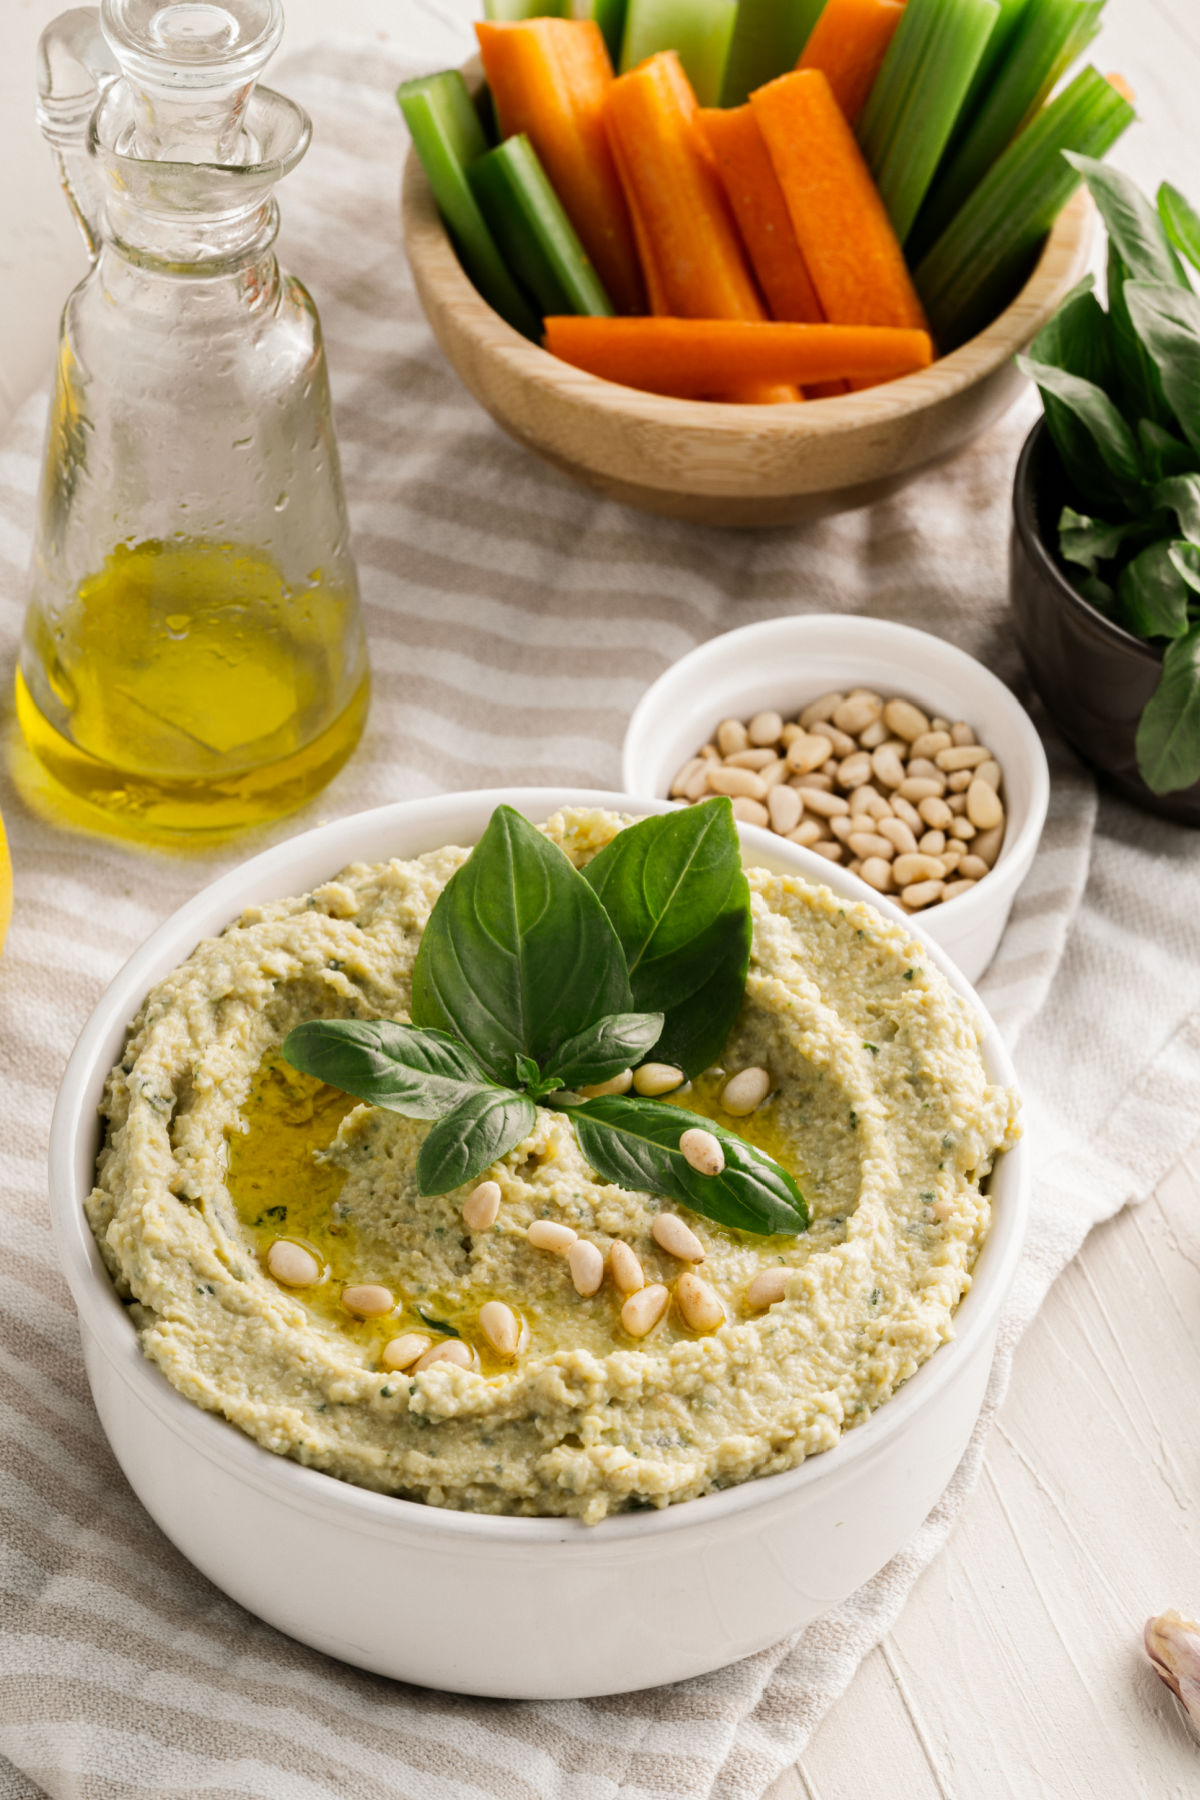 Pesto hummus in a white bowl with a side of carrot sticks.